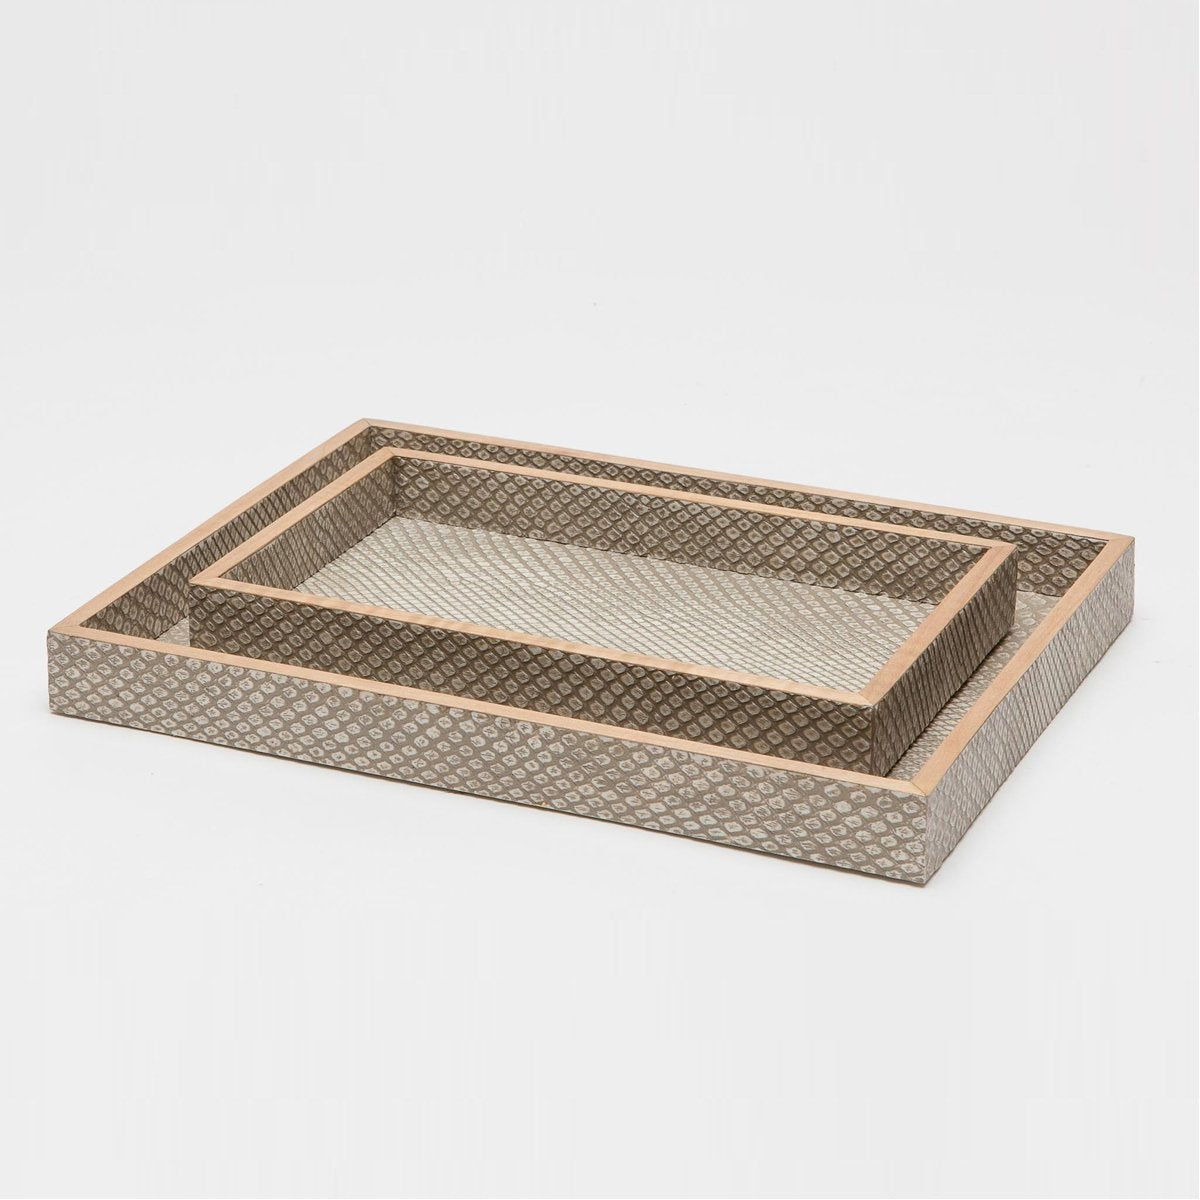 Pigeon and Poodle Goa Rectangular Tray - Straight, 2-Piece Set